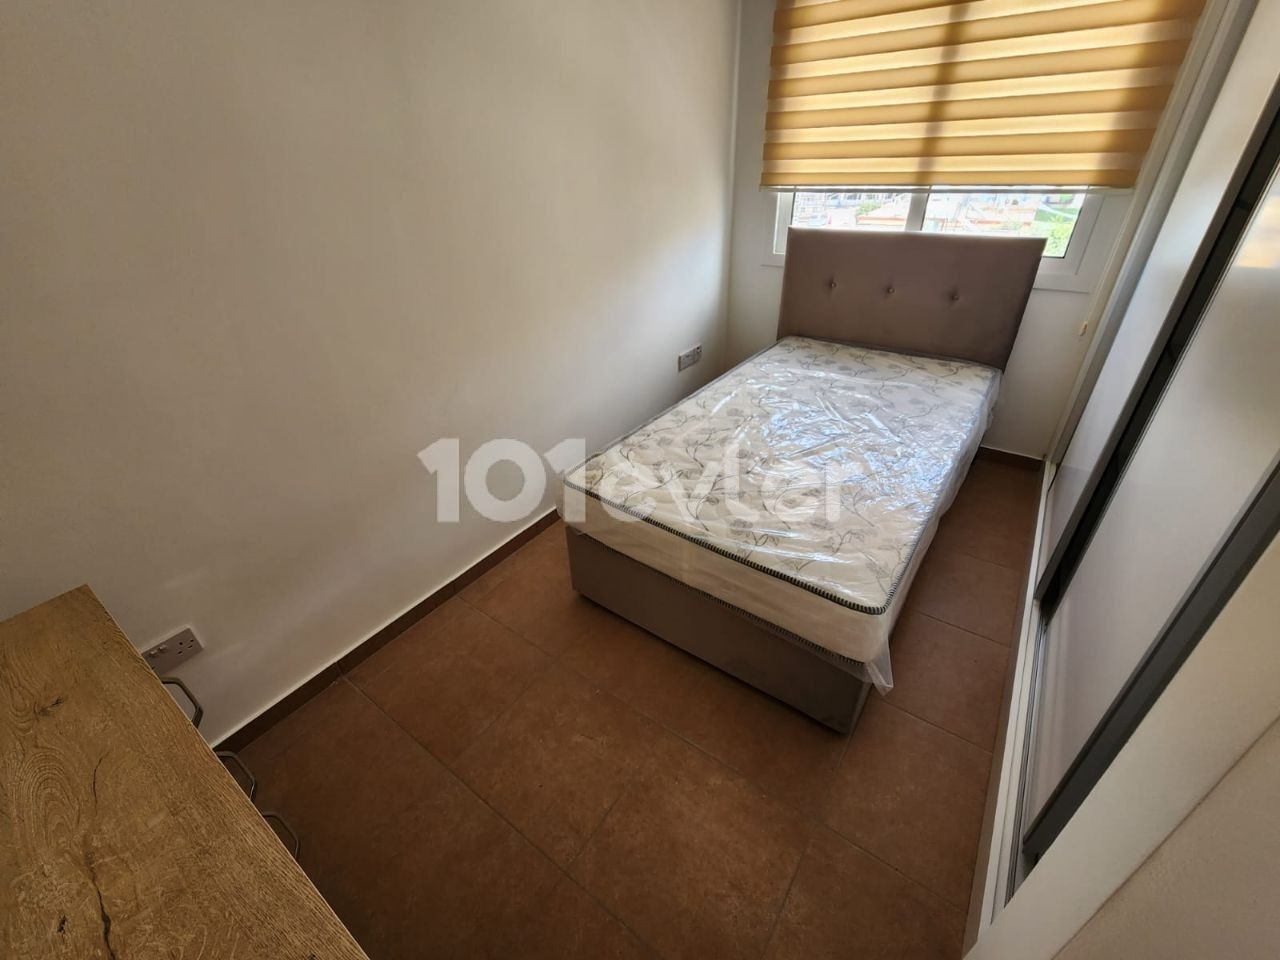 FLAT FOR RENT IN SAKARYA 2+1 350 STERLING FOR 6 RENT, 1 DEPOSIT, 1 COMMISSION AID, 6 MONTHS IN CASH PAYMENT FROM 300 TL. A 4-STOREY BUILDING ON THE 3rd FLOOR.